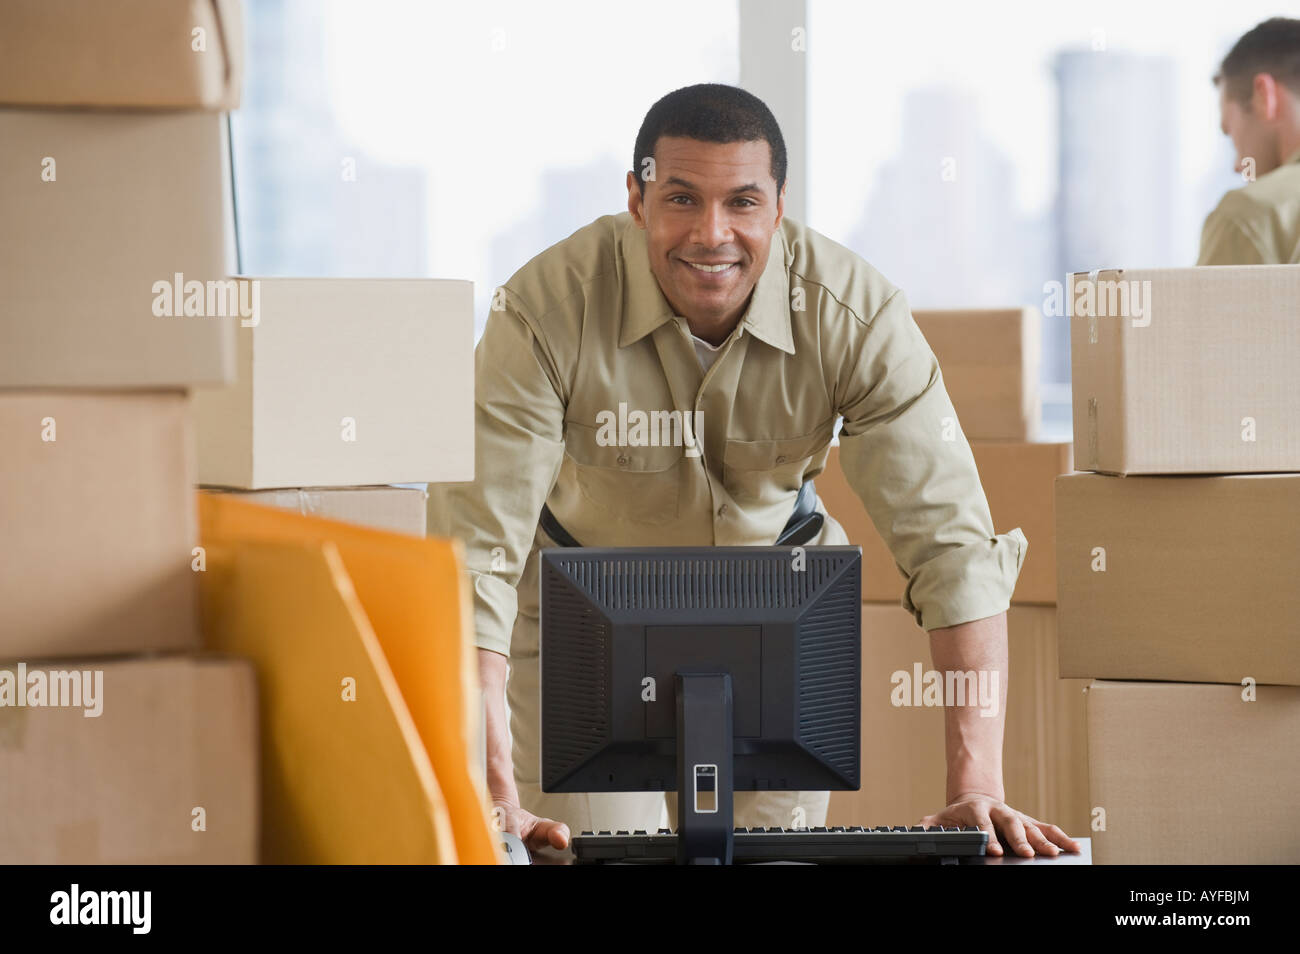 African delivery man next to computer Stock Photo